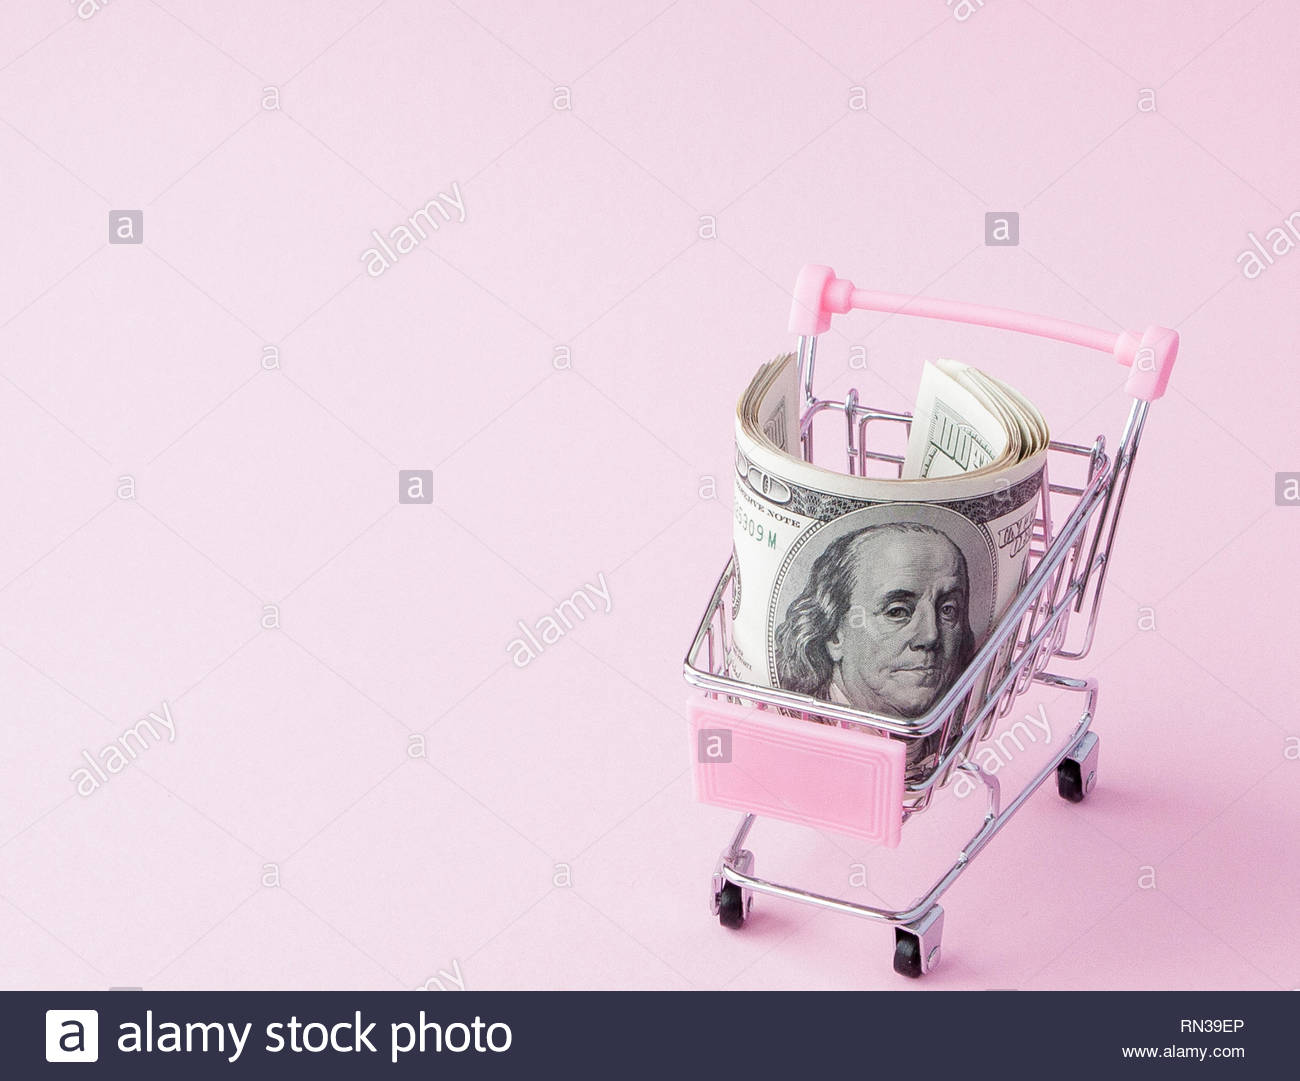 Supermarket Cart Full Of Us Dollar Banknotes On A Pink Background